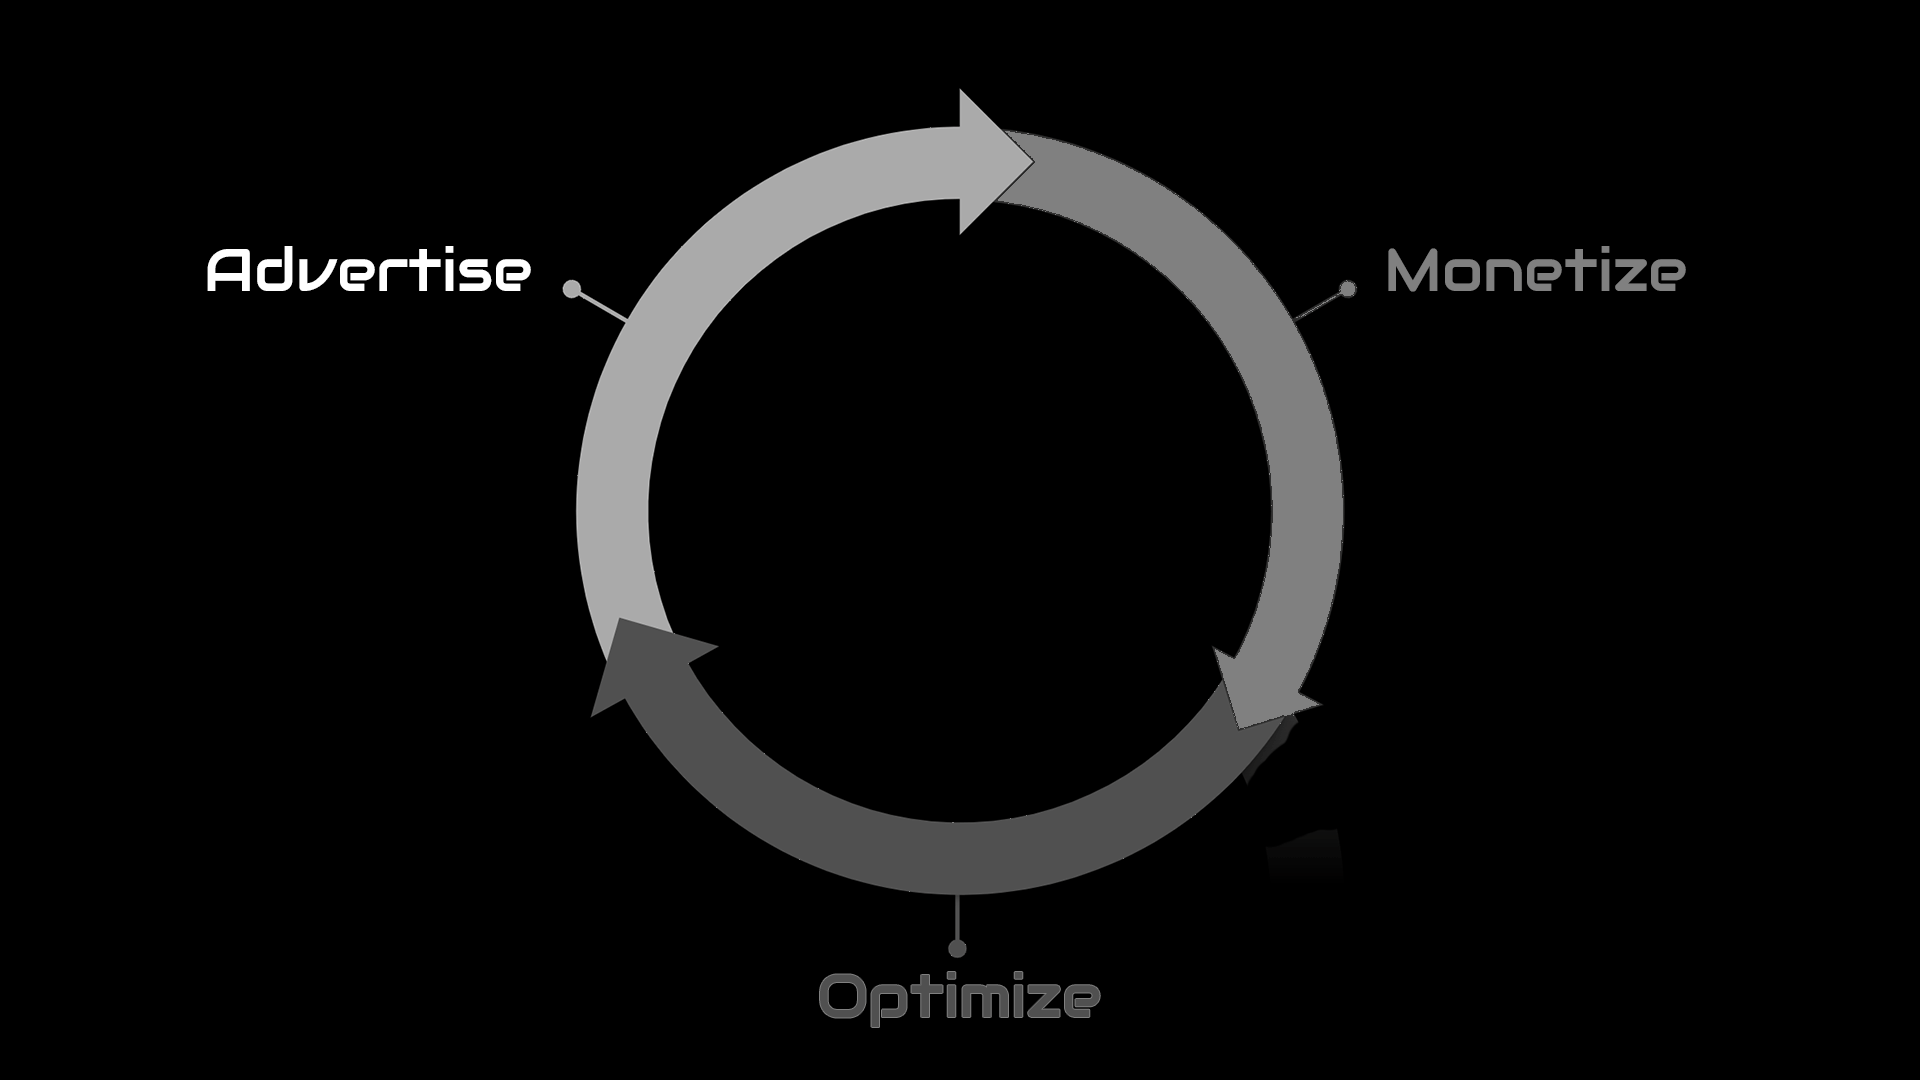 A diagram of a three-part cycle that includes advertising, monetizing, and optimizing.